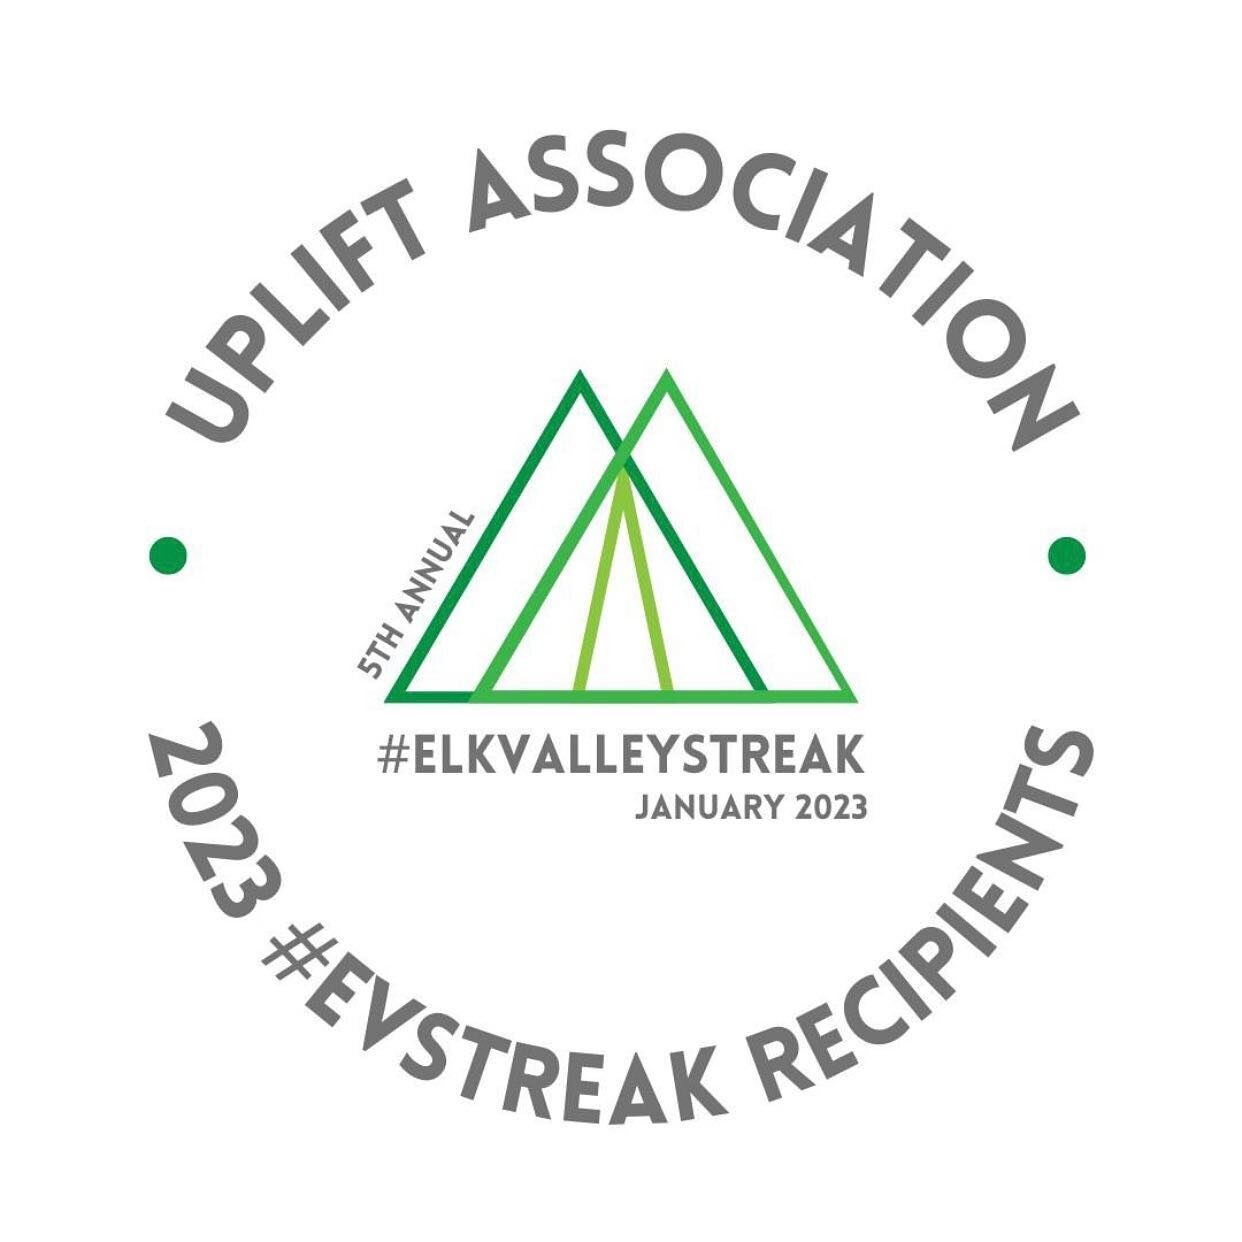 We are so honoured to have been selected to be the 2023 Elk Valley Streak Recipient!

After four successful streakin' years, this popular January challenge, is back, bigger and better than ever AND under a new name  #ElkValleyStreak

What started out